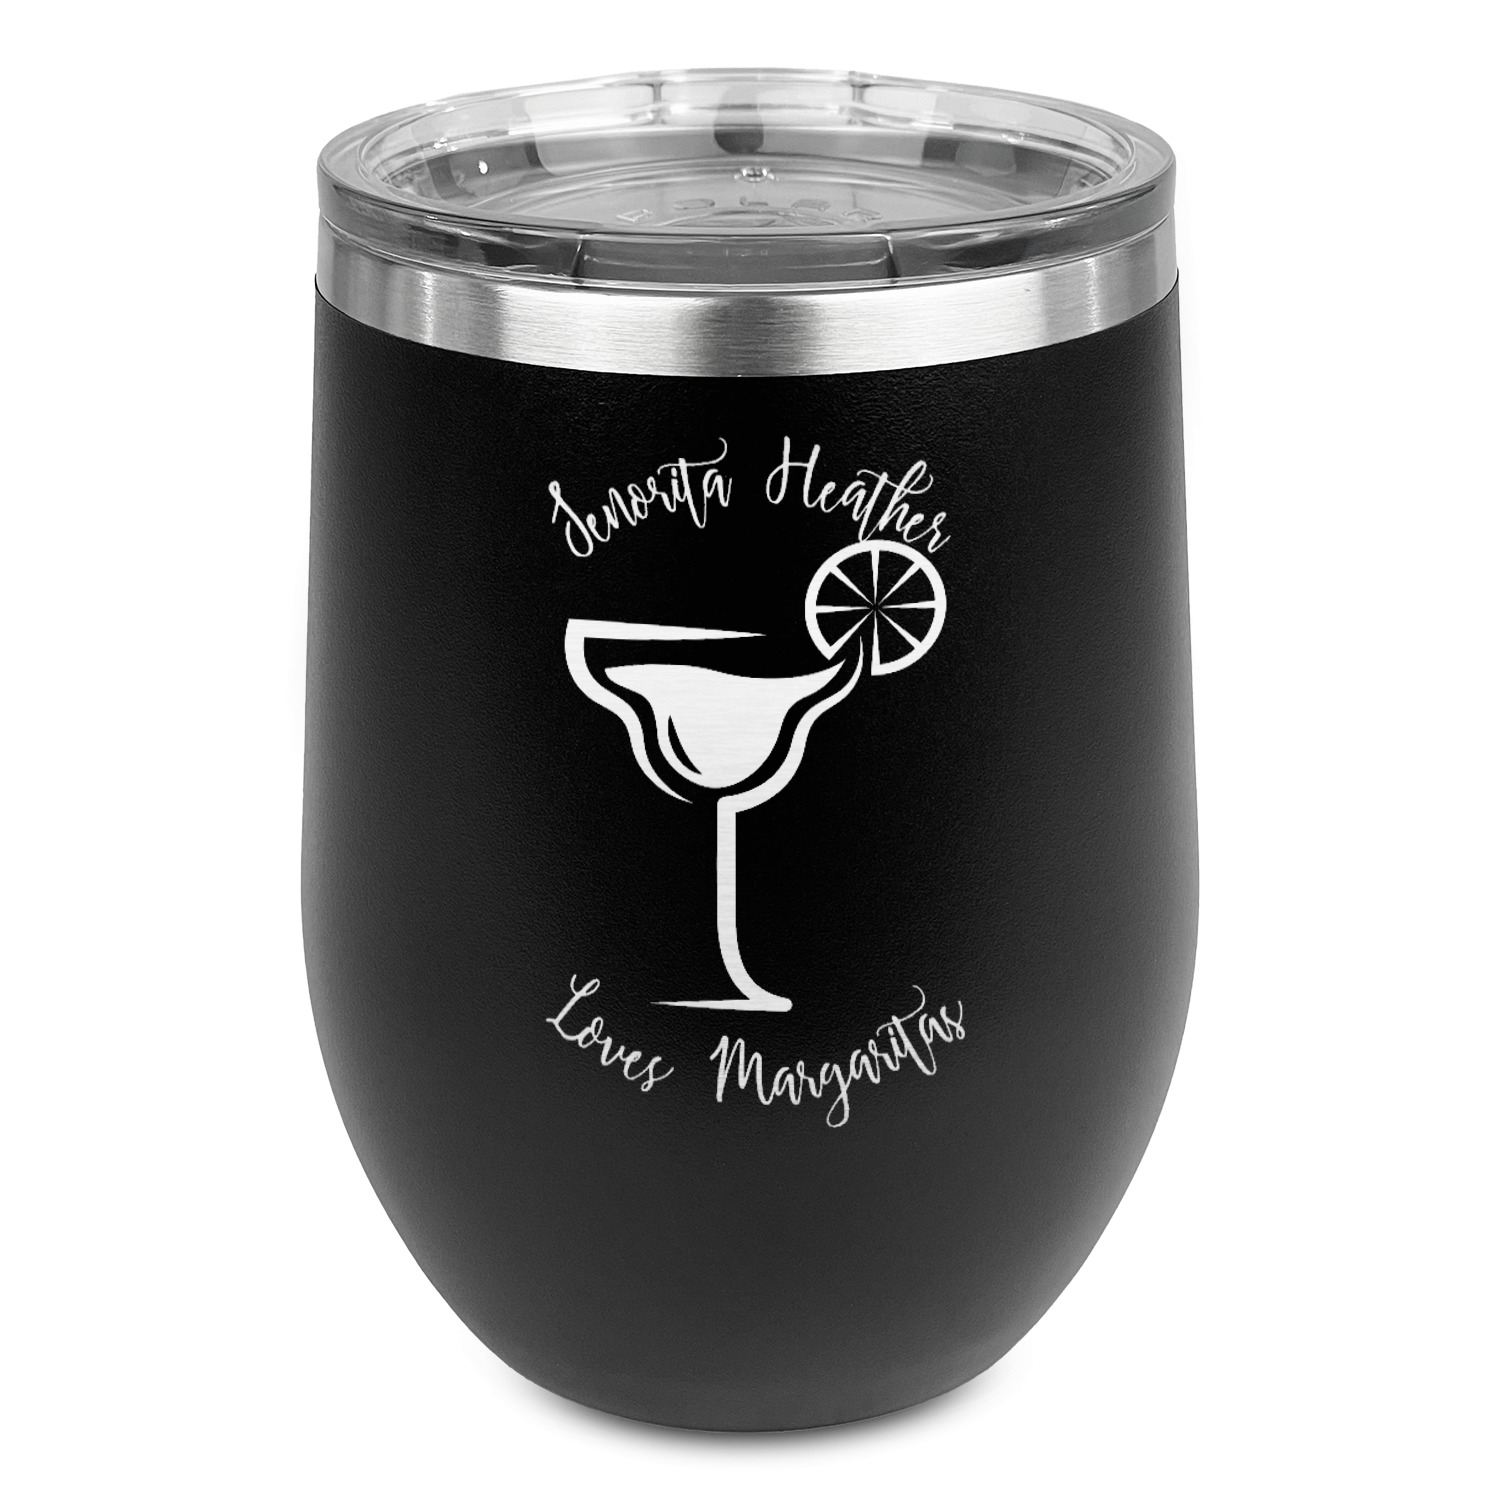 Personalized I Drink Because Wine Glasses for Coworkers